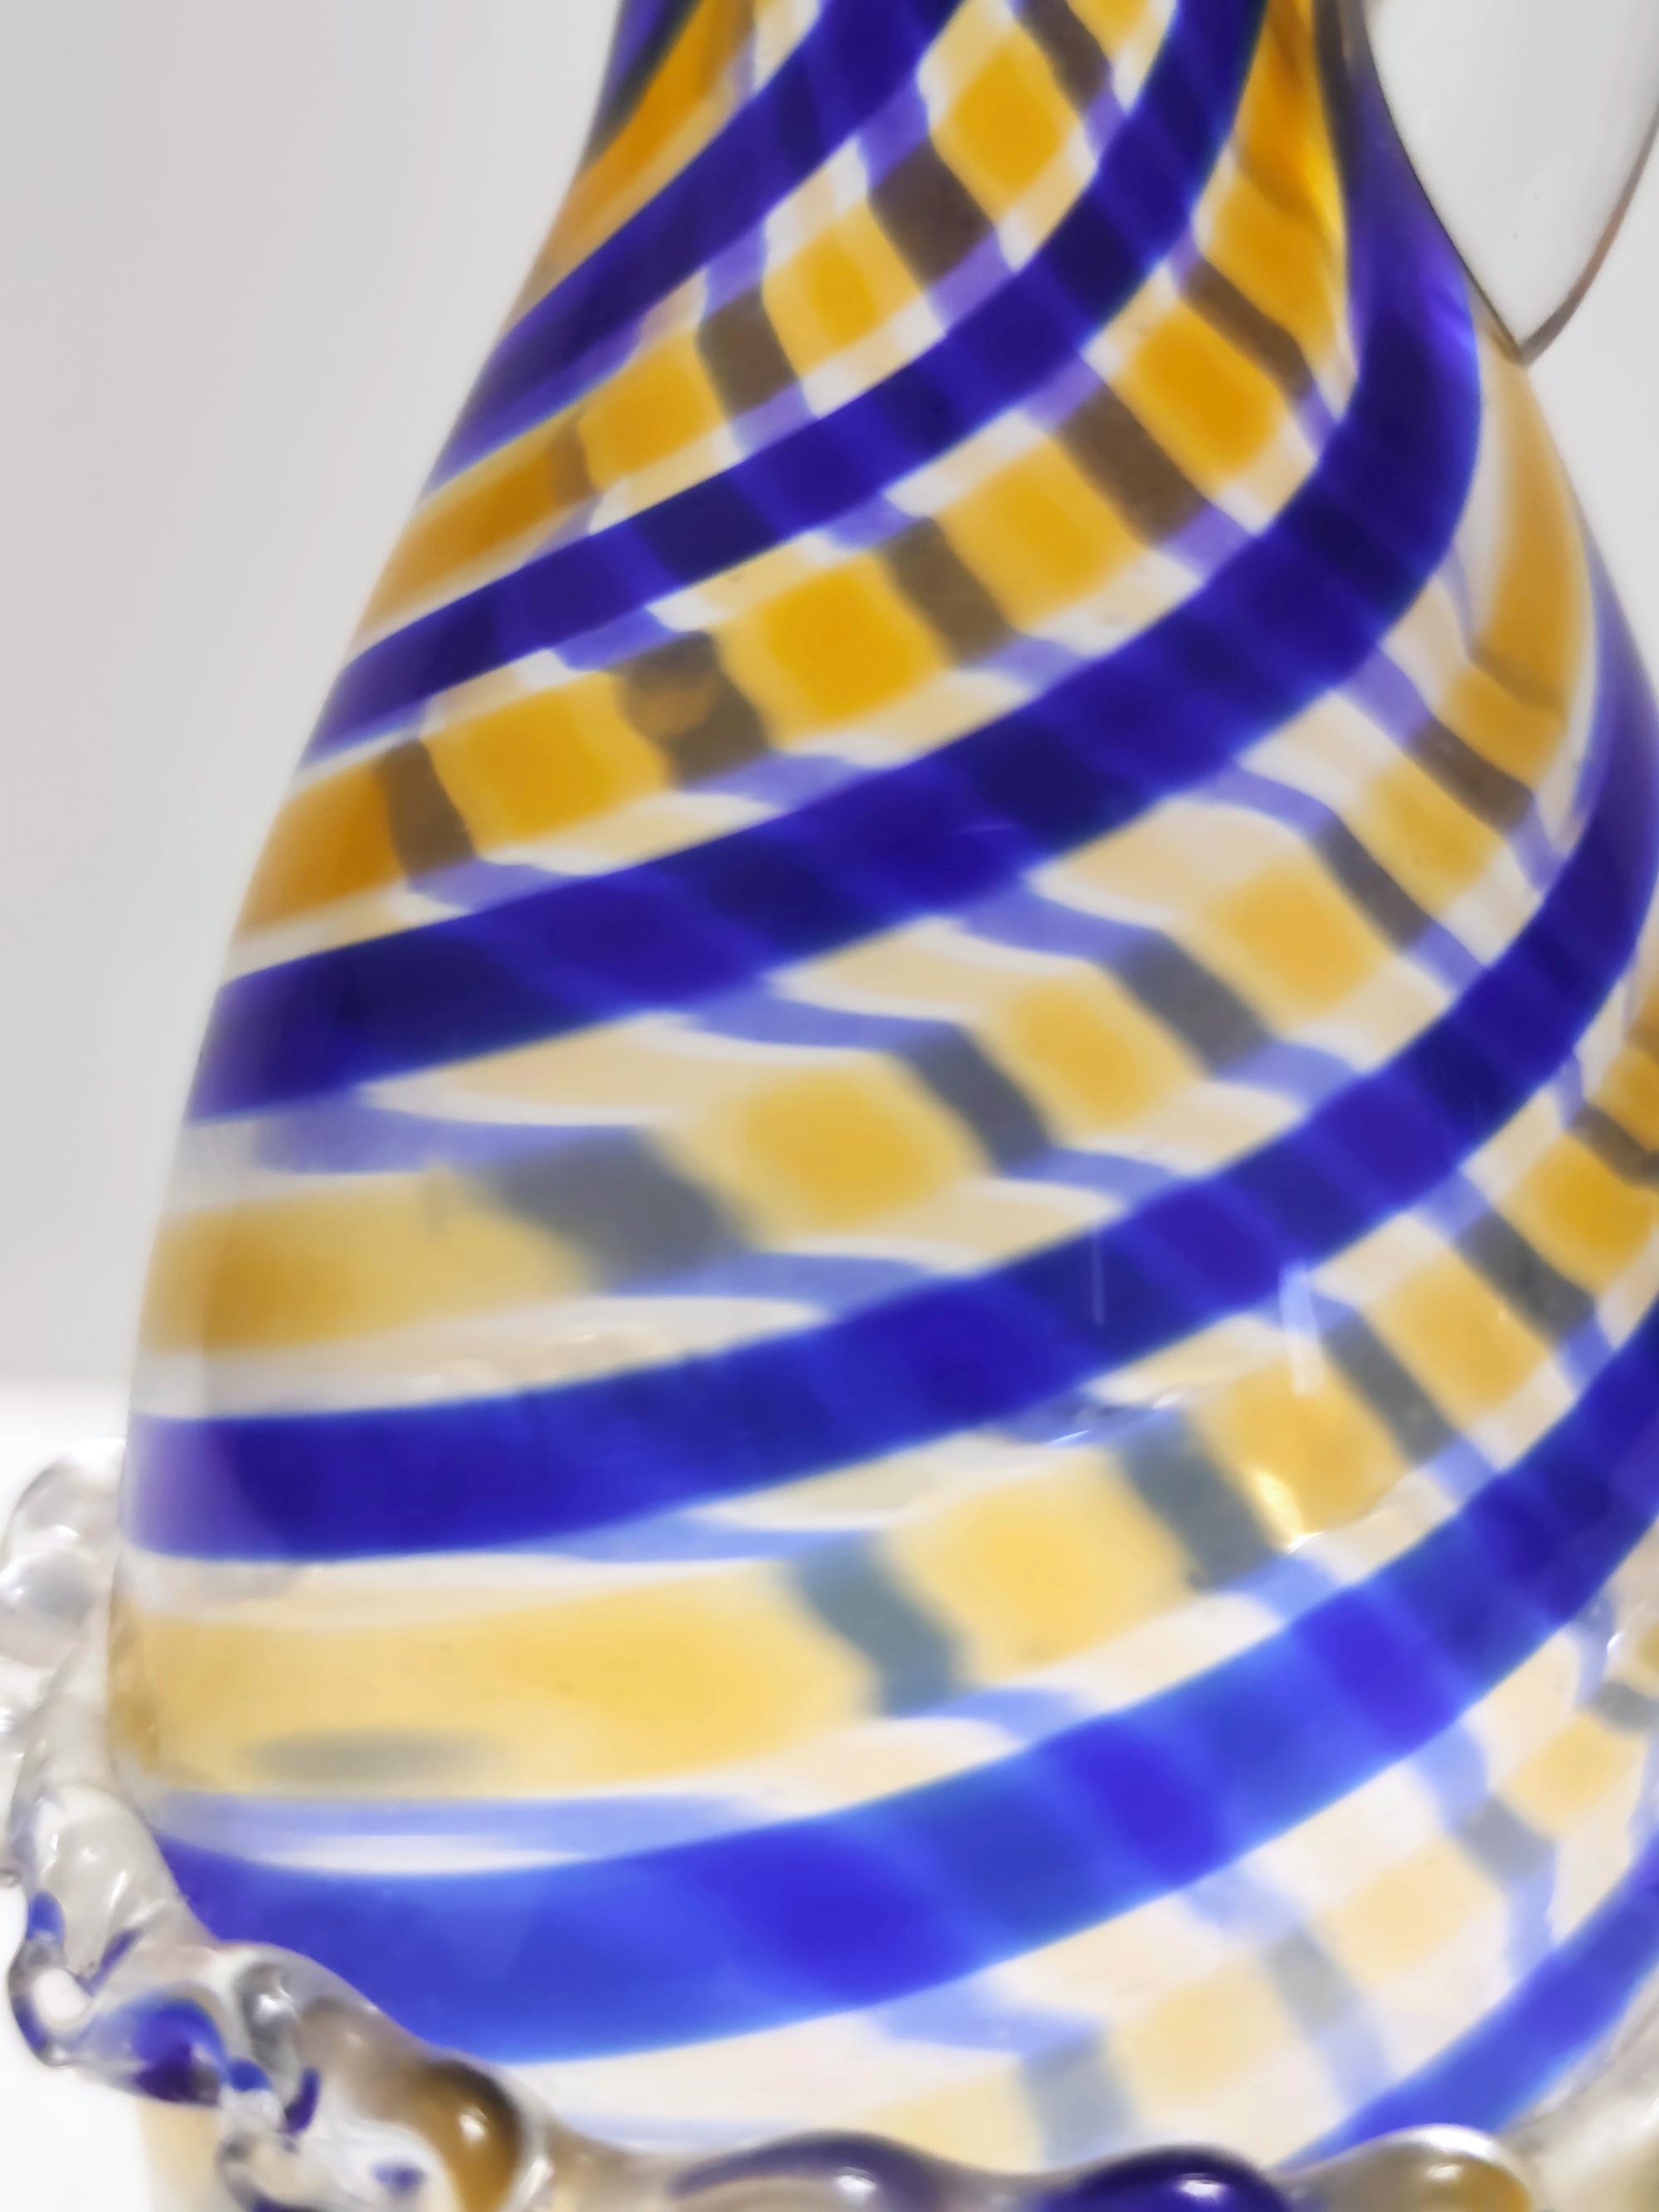 Mid-20th Century Vintage Murano Glass Pitcher Vase Ascribable to Toso with Blue and Yellow Canes For Sale